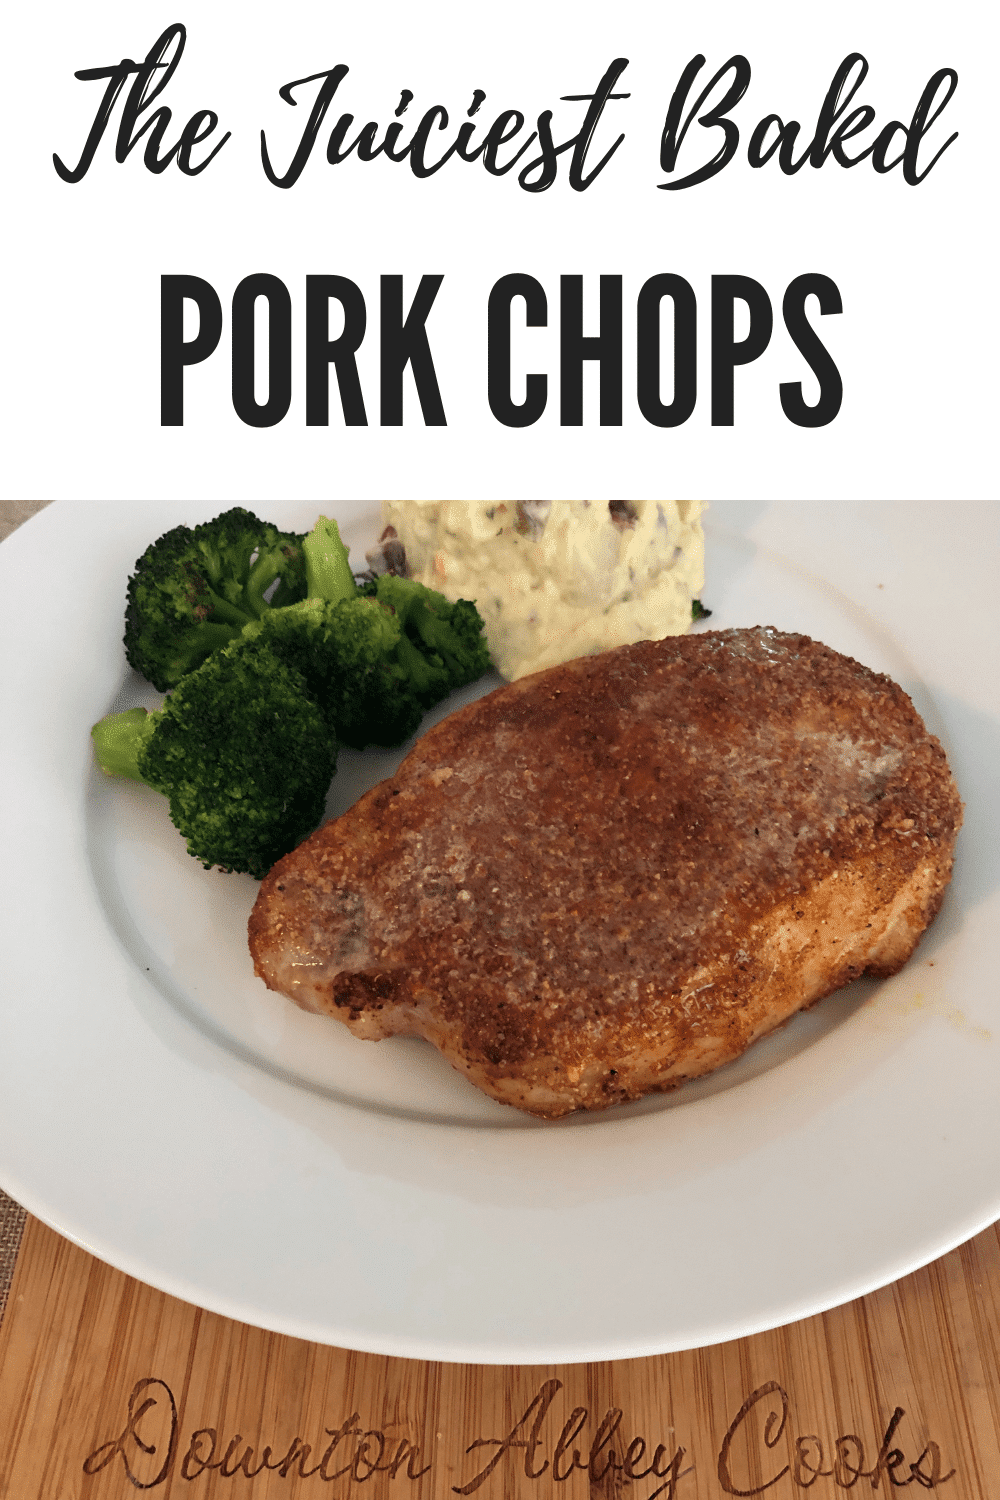 The Juiciest Baked PorkChops Can Be Yours in 30 Minutes - Downton Abbey ...